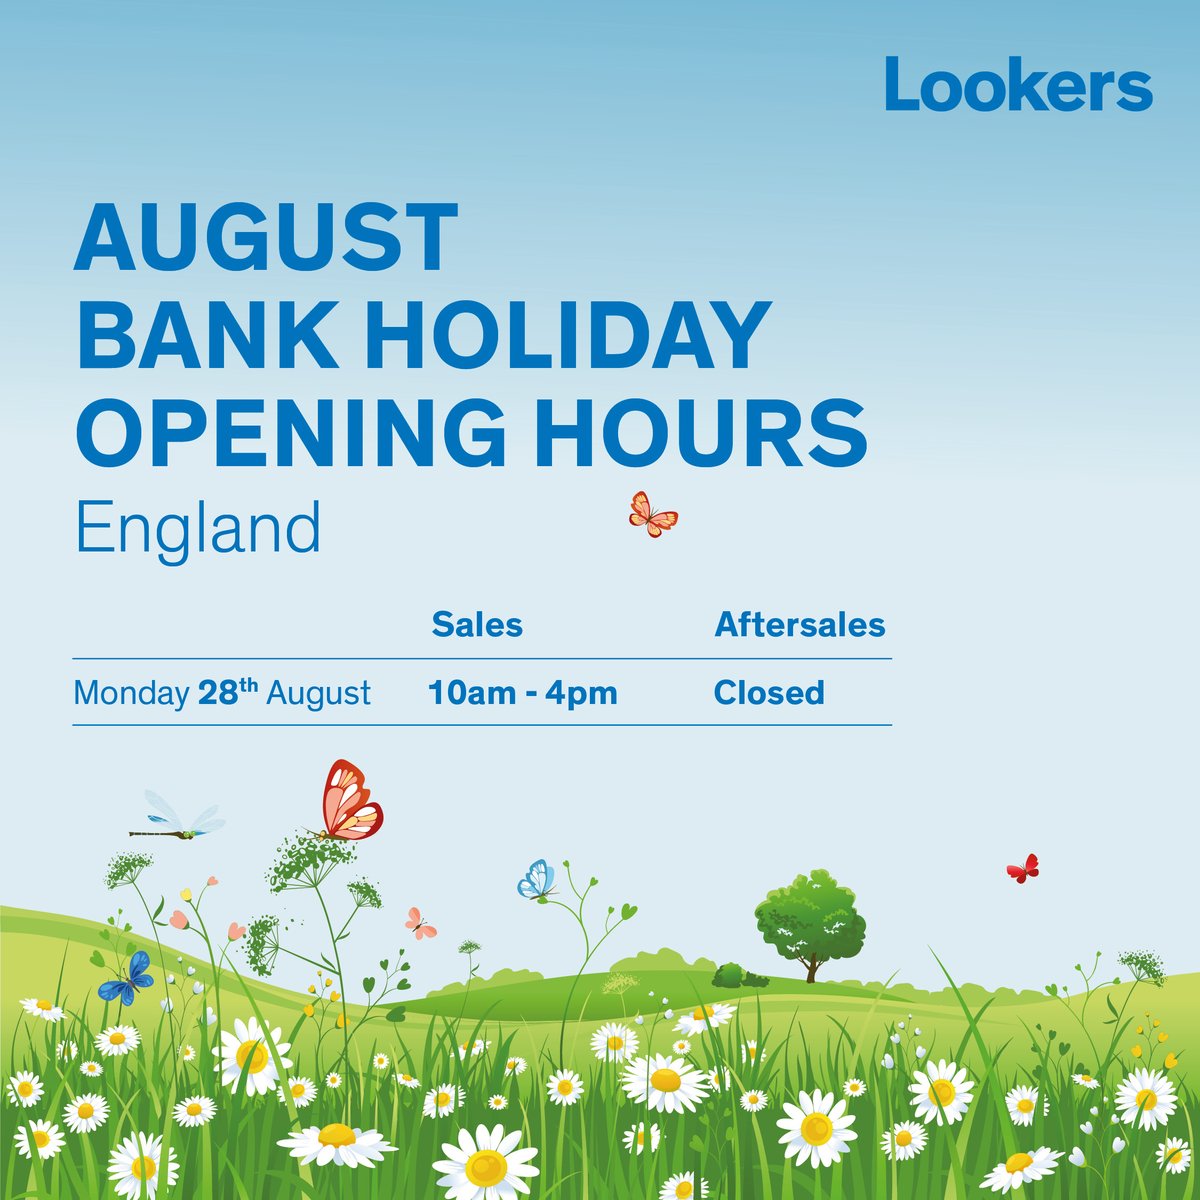 So you don't miss us this bank holiday. Here are our opening times. Don't forget our contact centres are open and happy to take your calls, and can be reached at lookers.co.uk/contact-us #ChooseLookers #BankHoliday